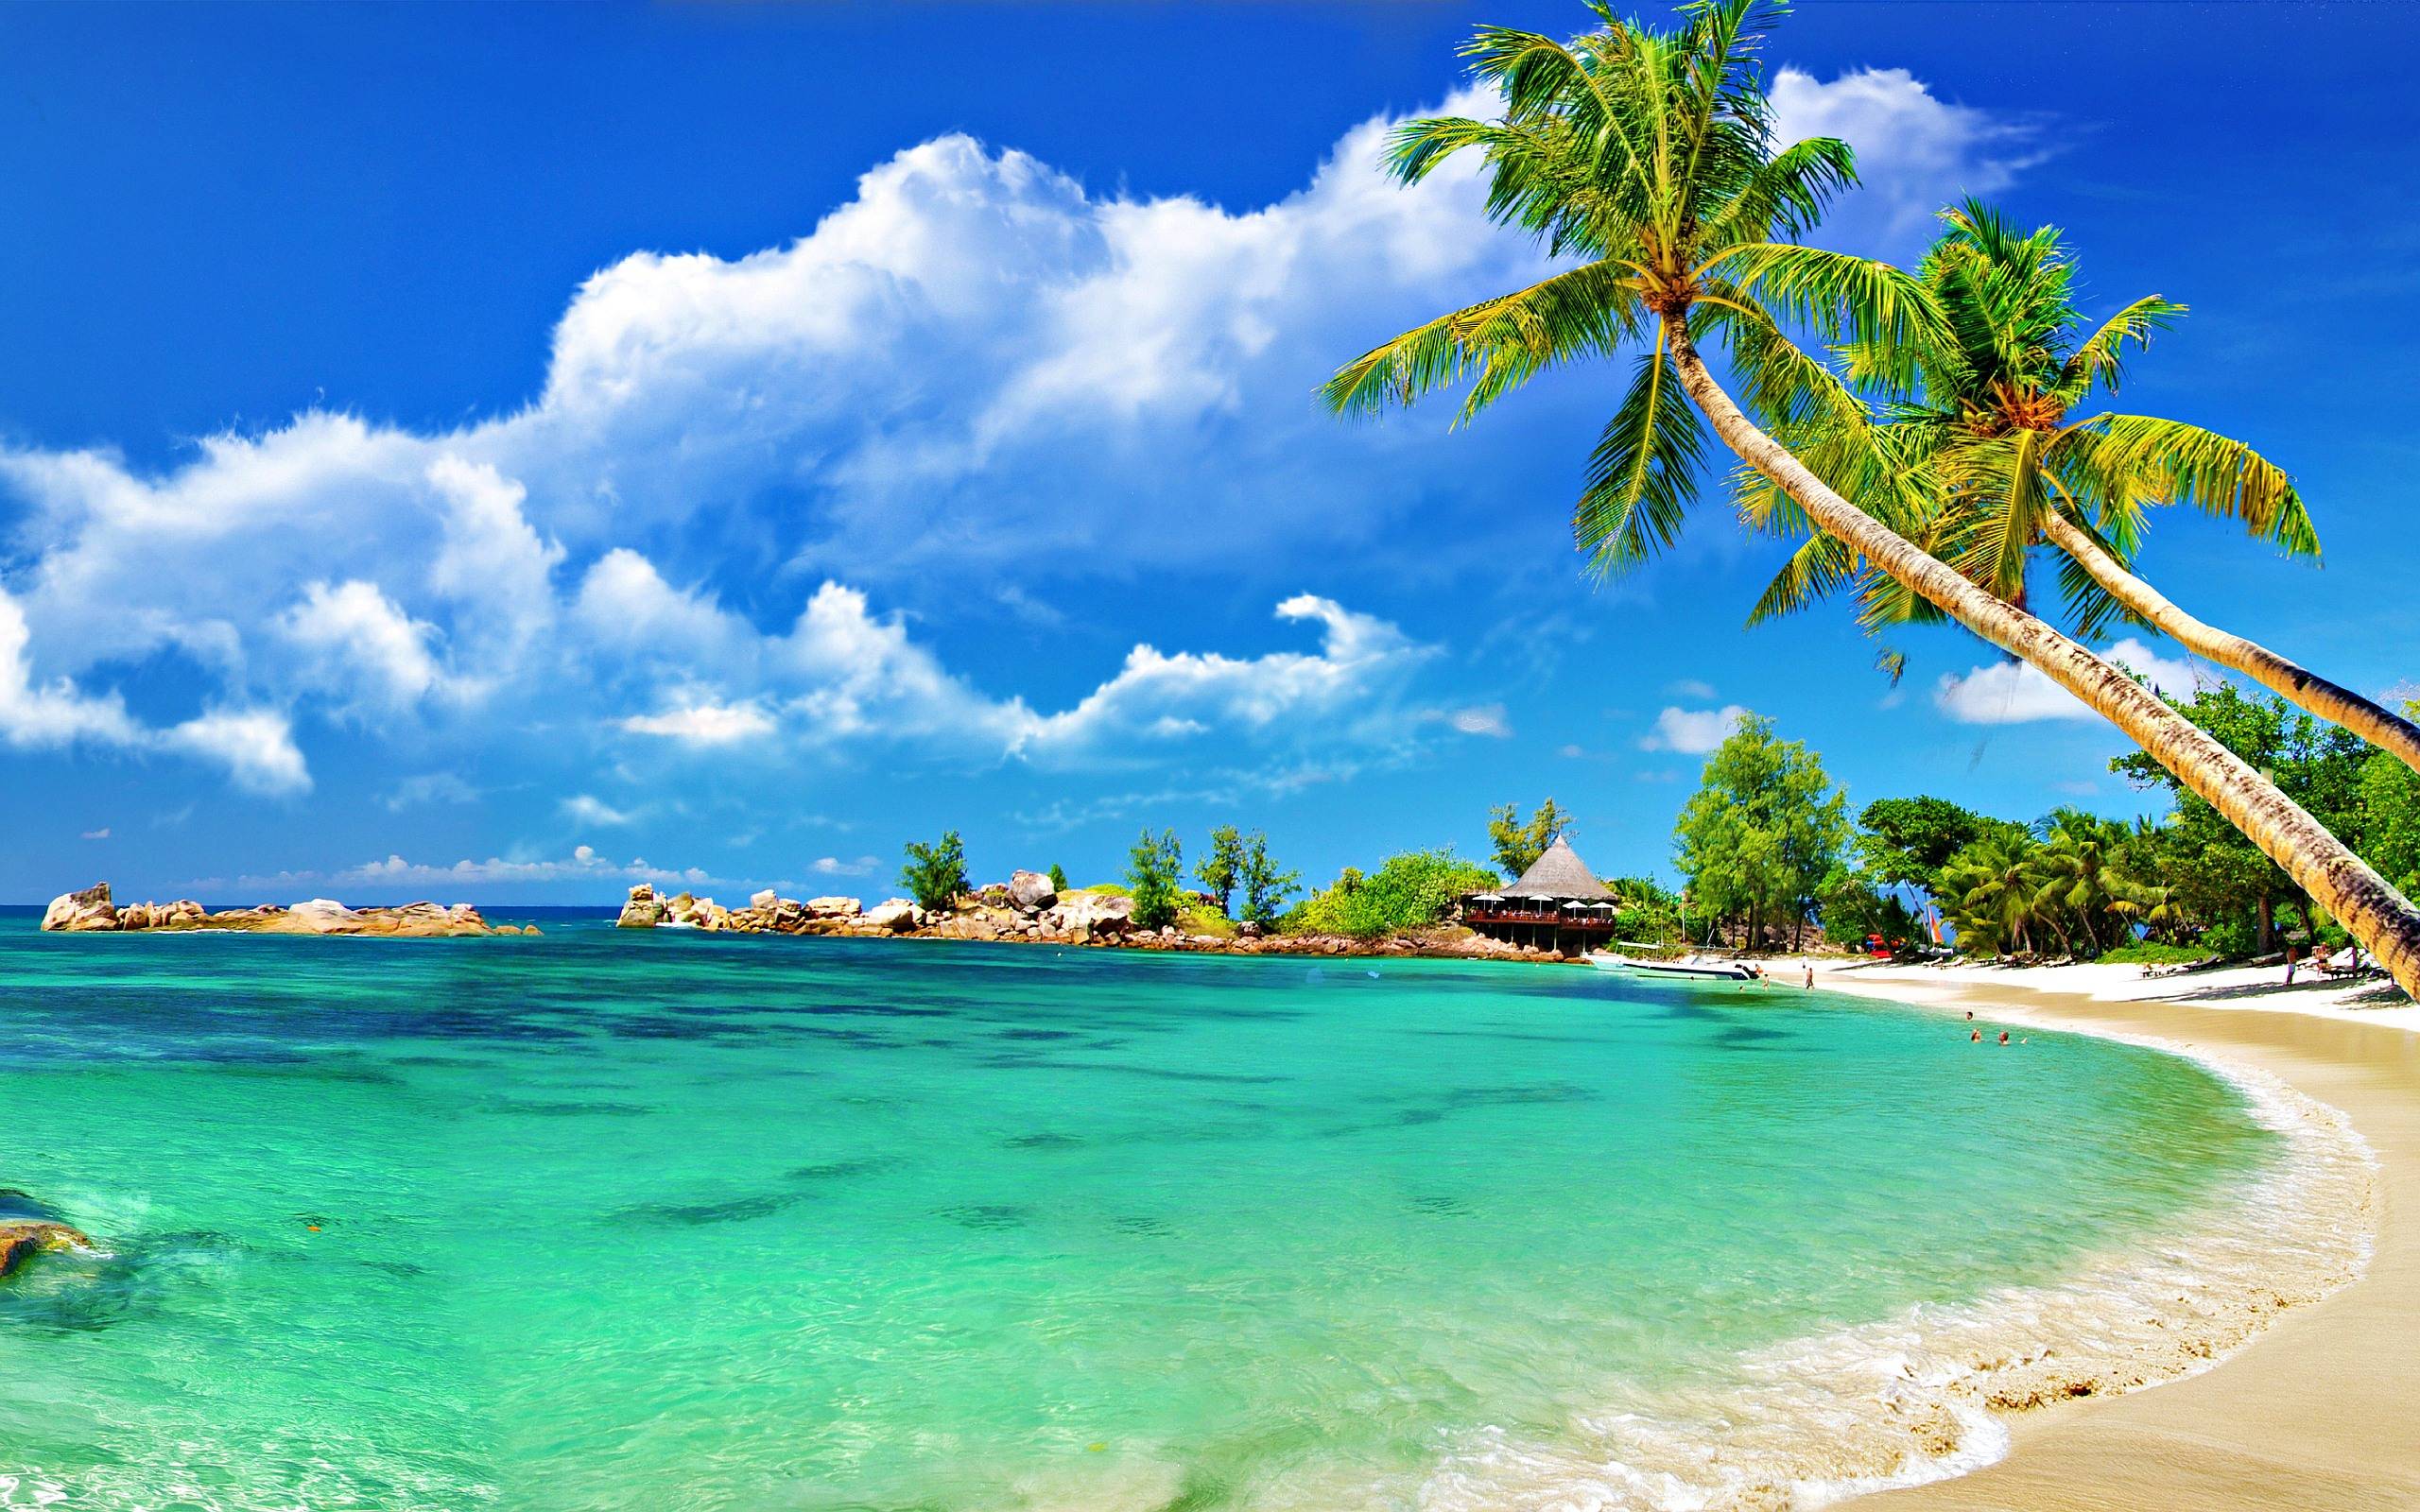 Wallpaper Goa 5k 4k wallpaper India Indian ocean palms boats travel  tourism Best Beaches in the World Nature 6143